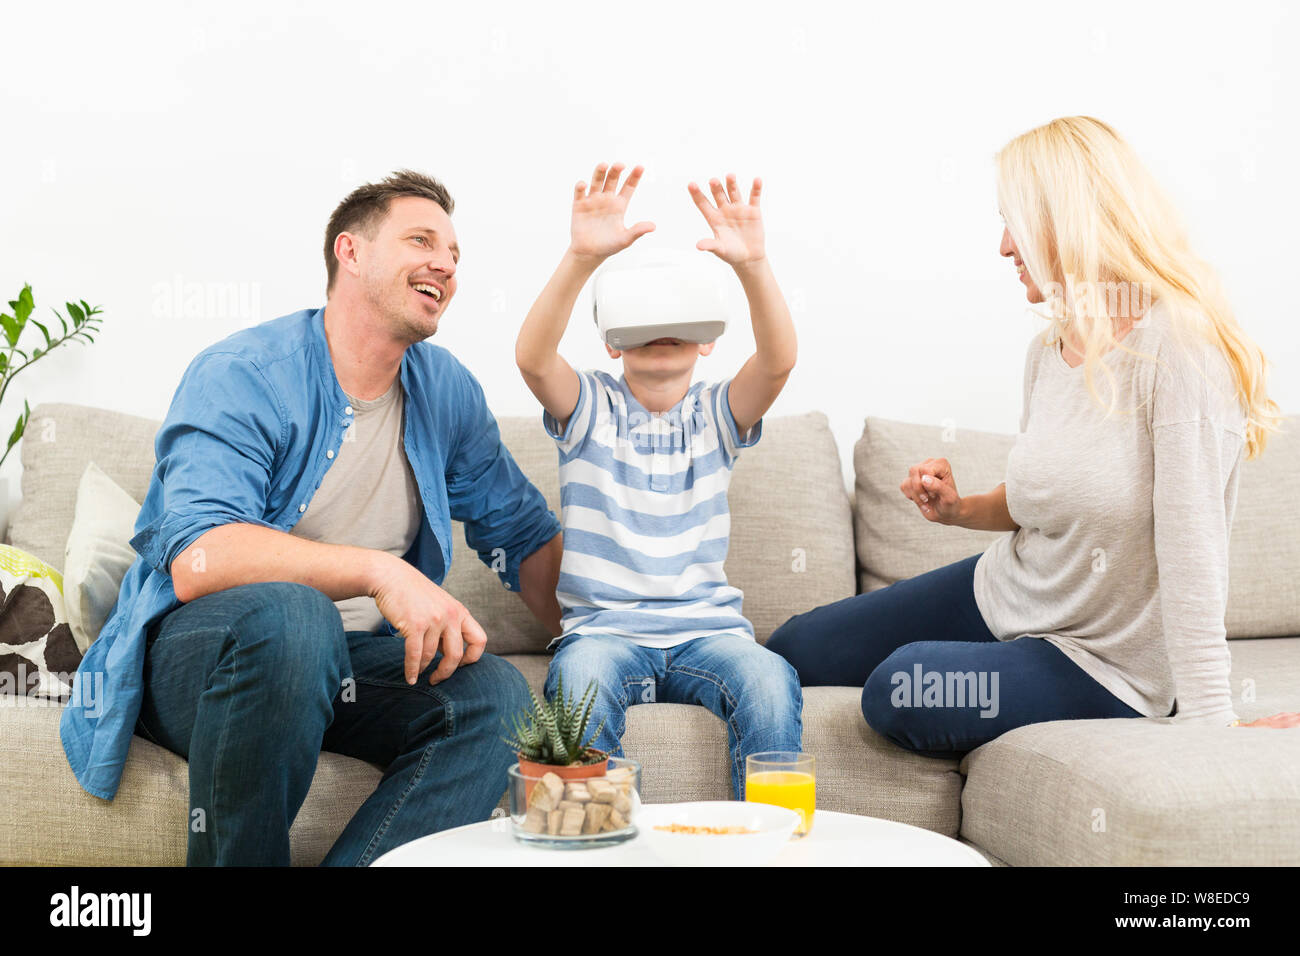 Happy family at home on living room sofa having fun playing games using virtual reality headset Stock Photo